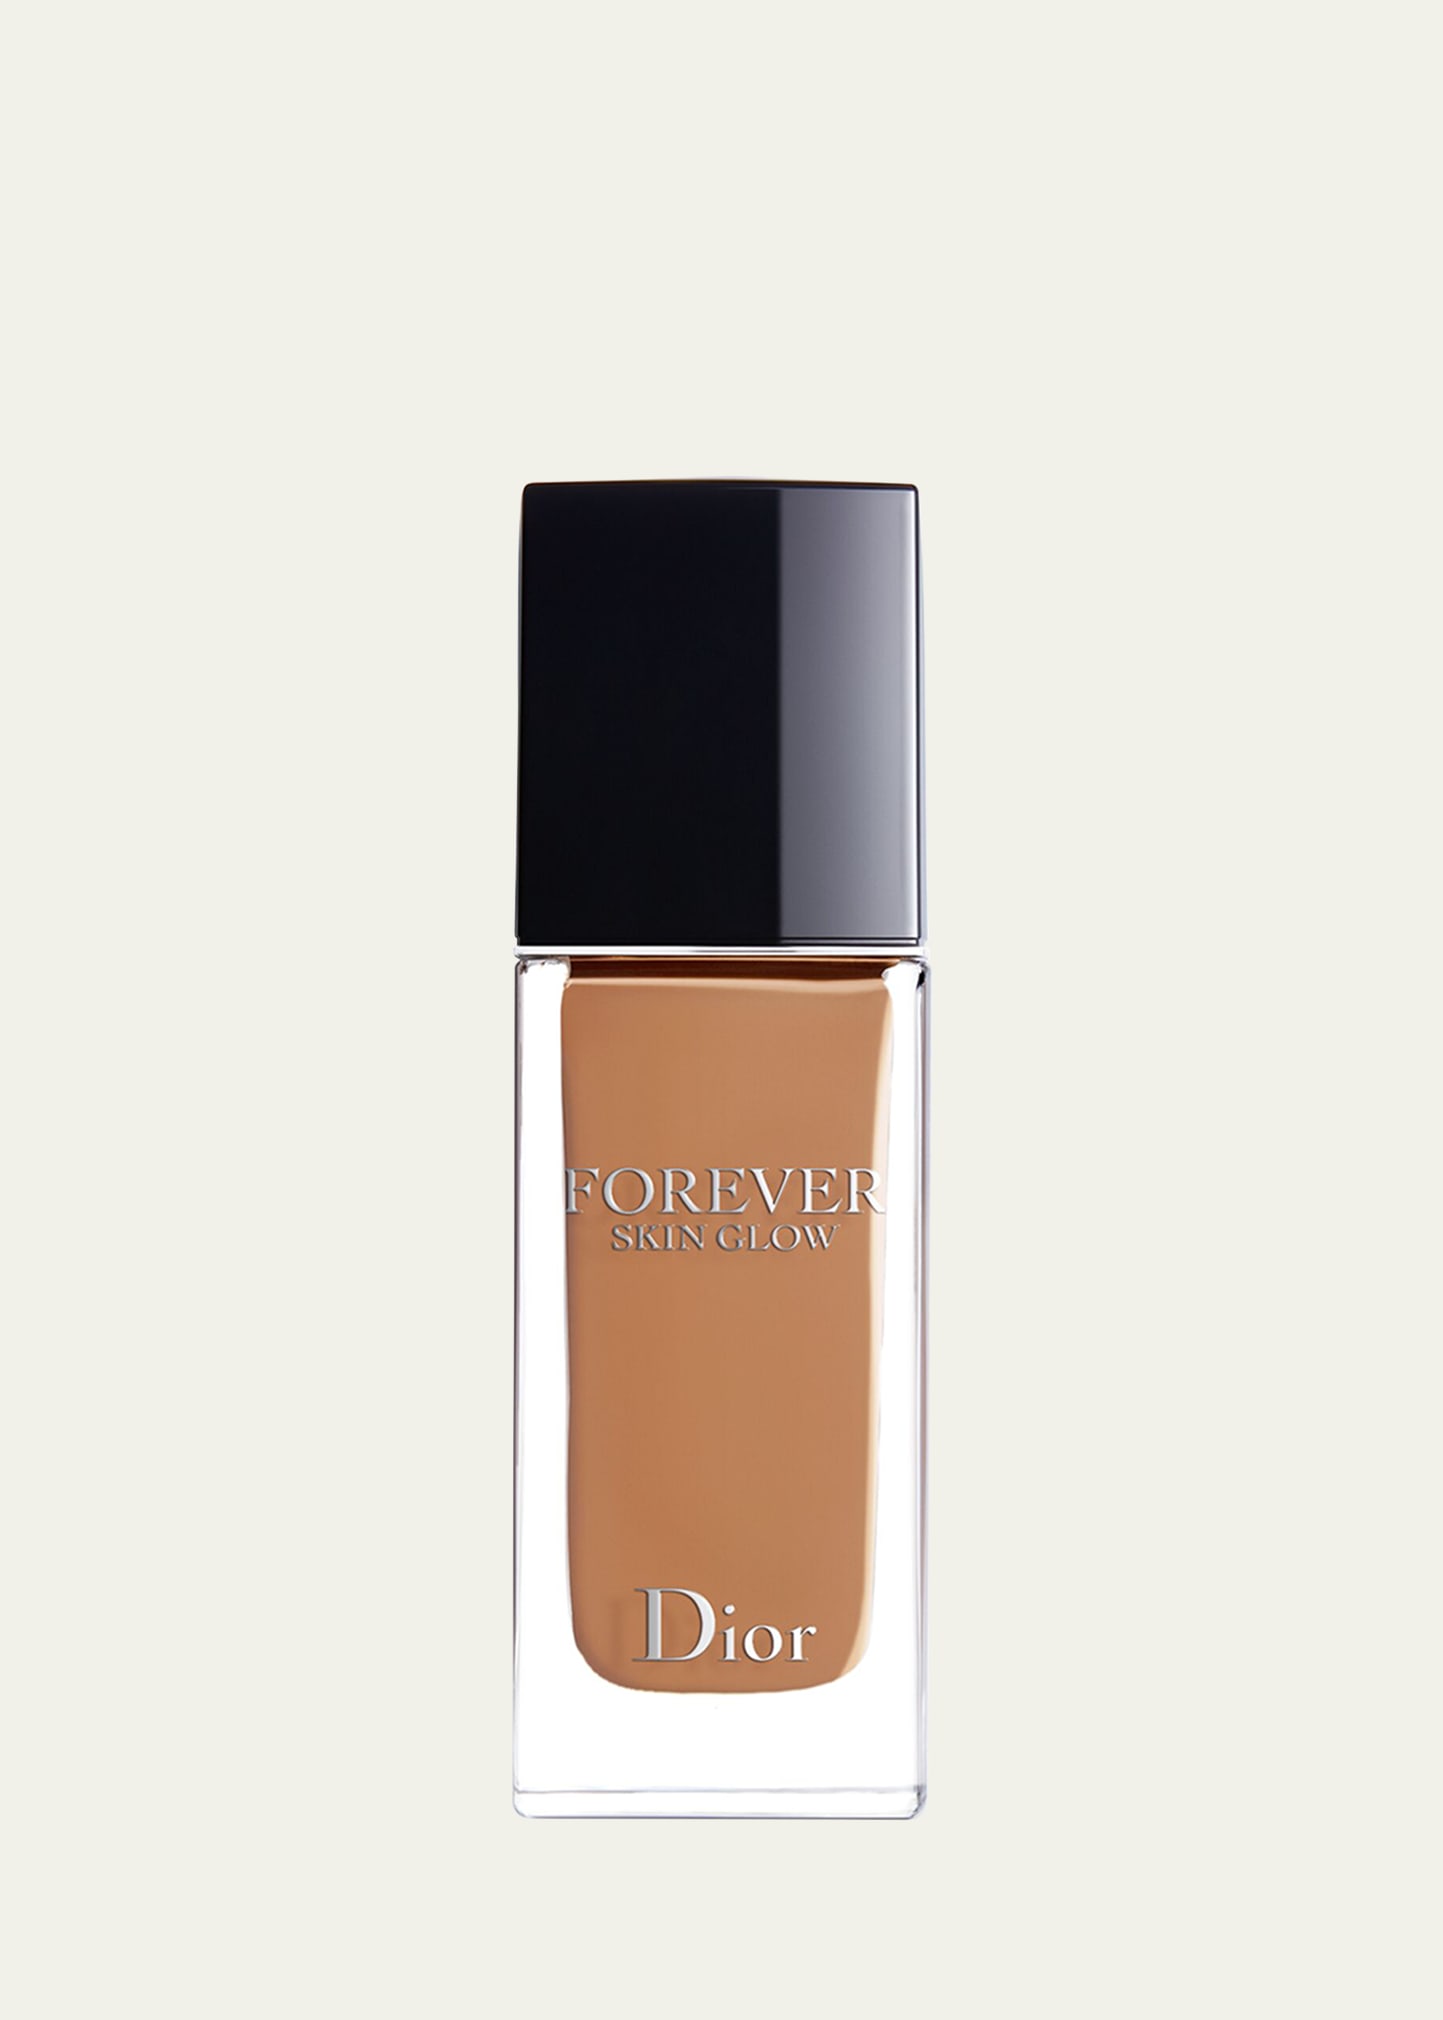 Dior 1 Oz.  Forever Skin Glow Hydrating Foundation Spf 15 In 5 Neutral